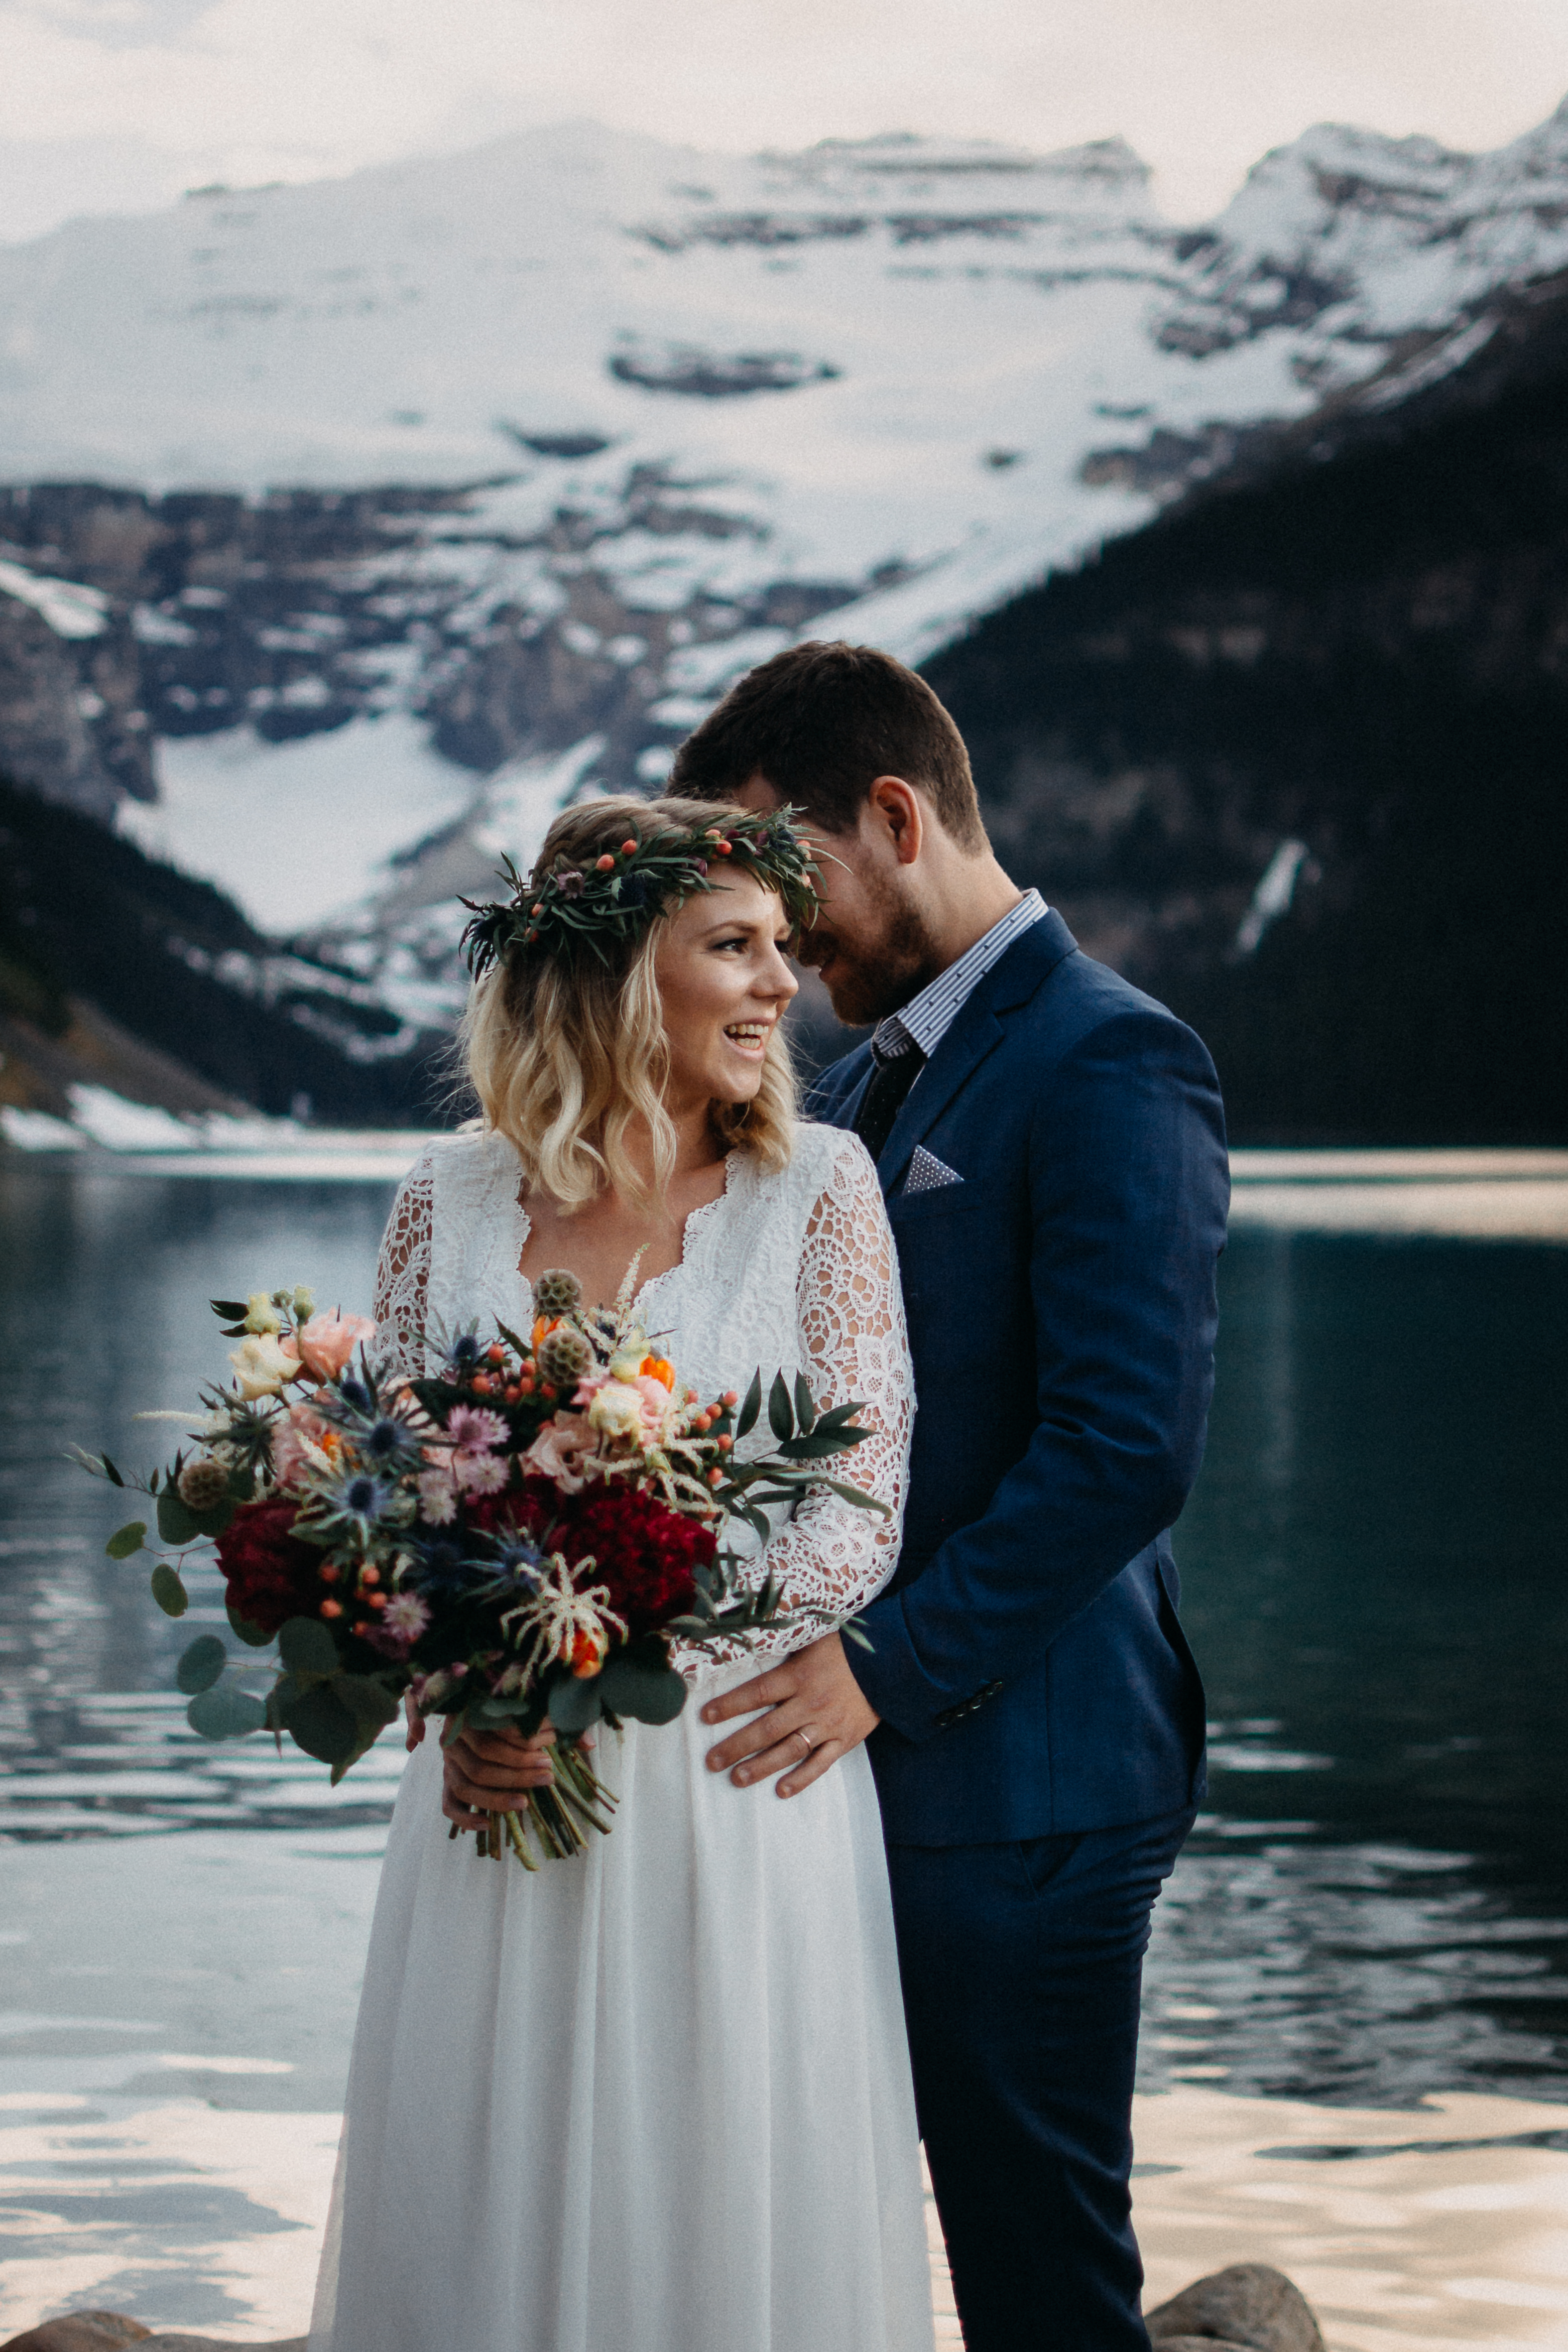 The bride laughing and groom holding each her at Lake Louise, Alberta